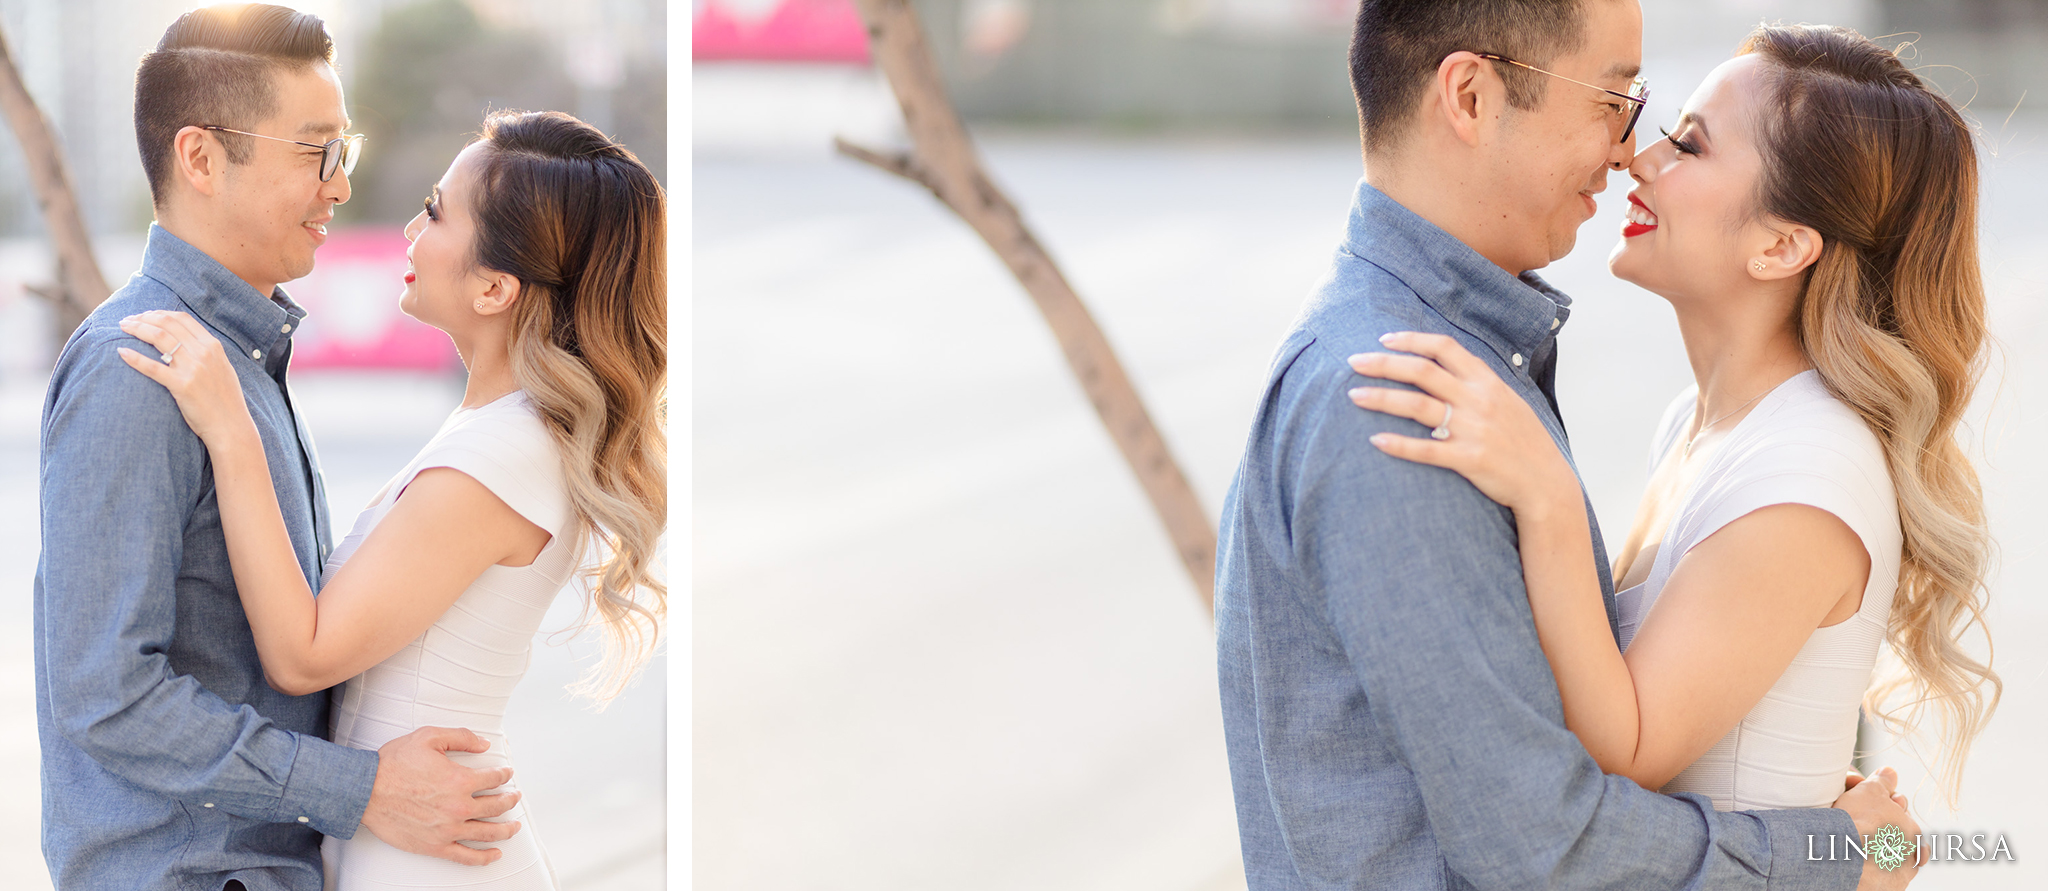 13 Downtown Los Angeles Engagement Street Photography